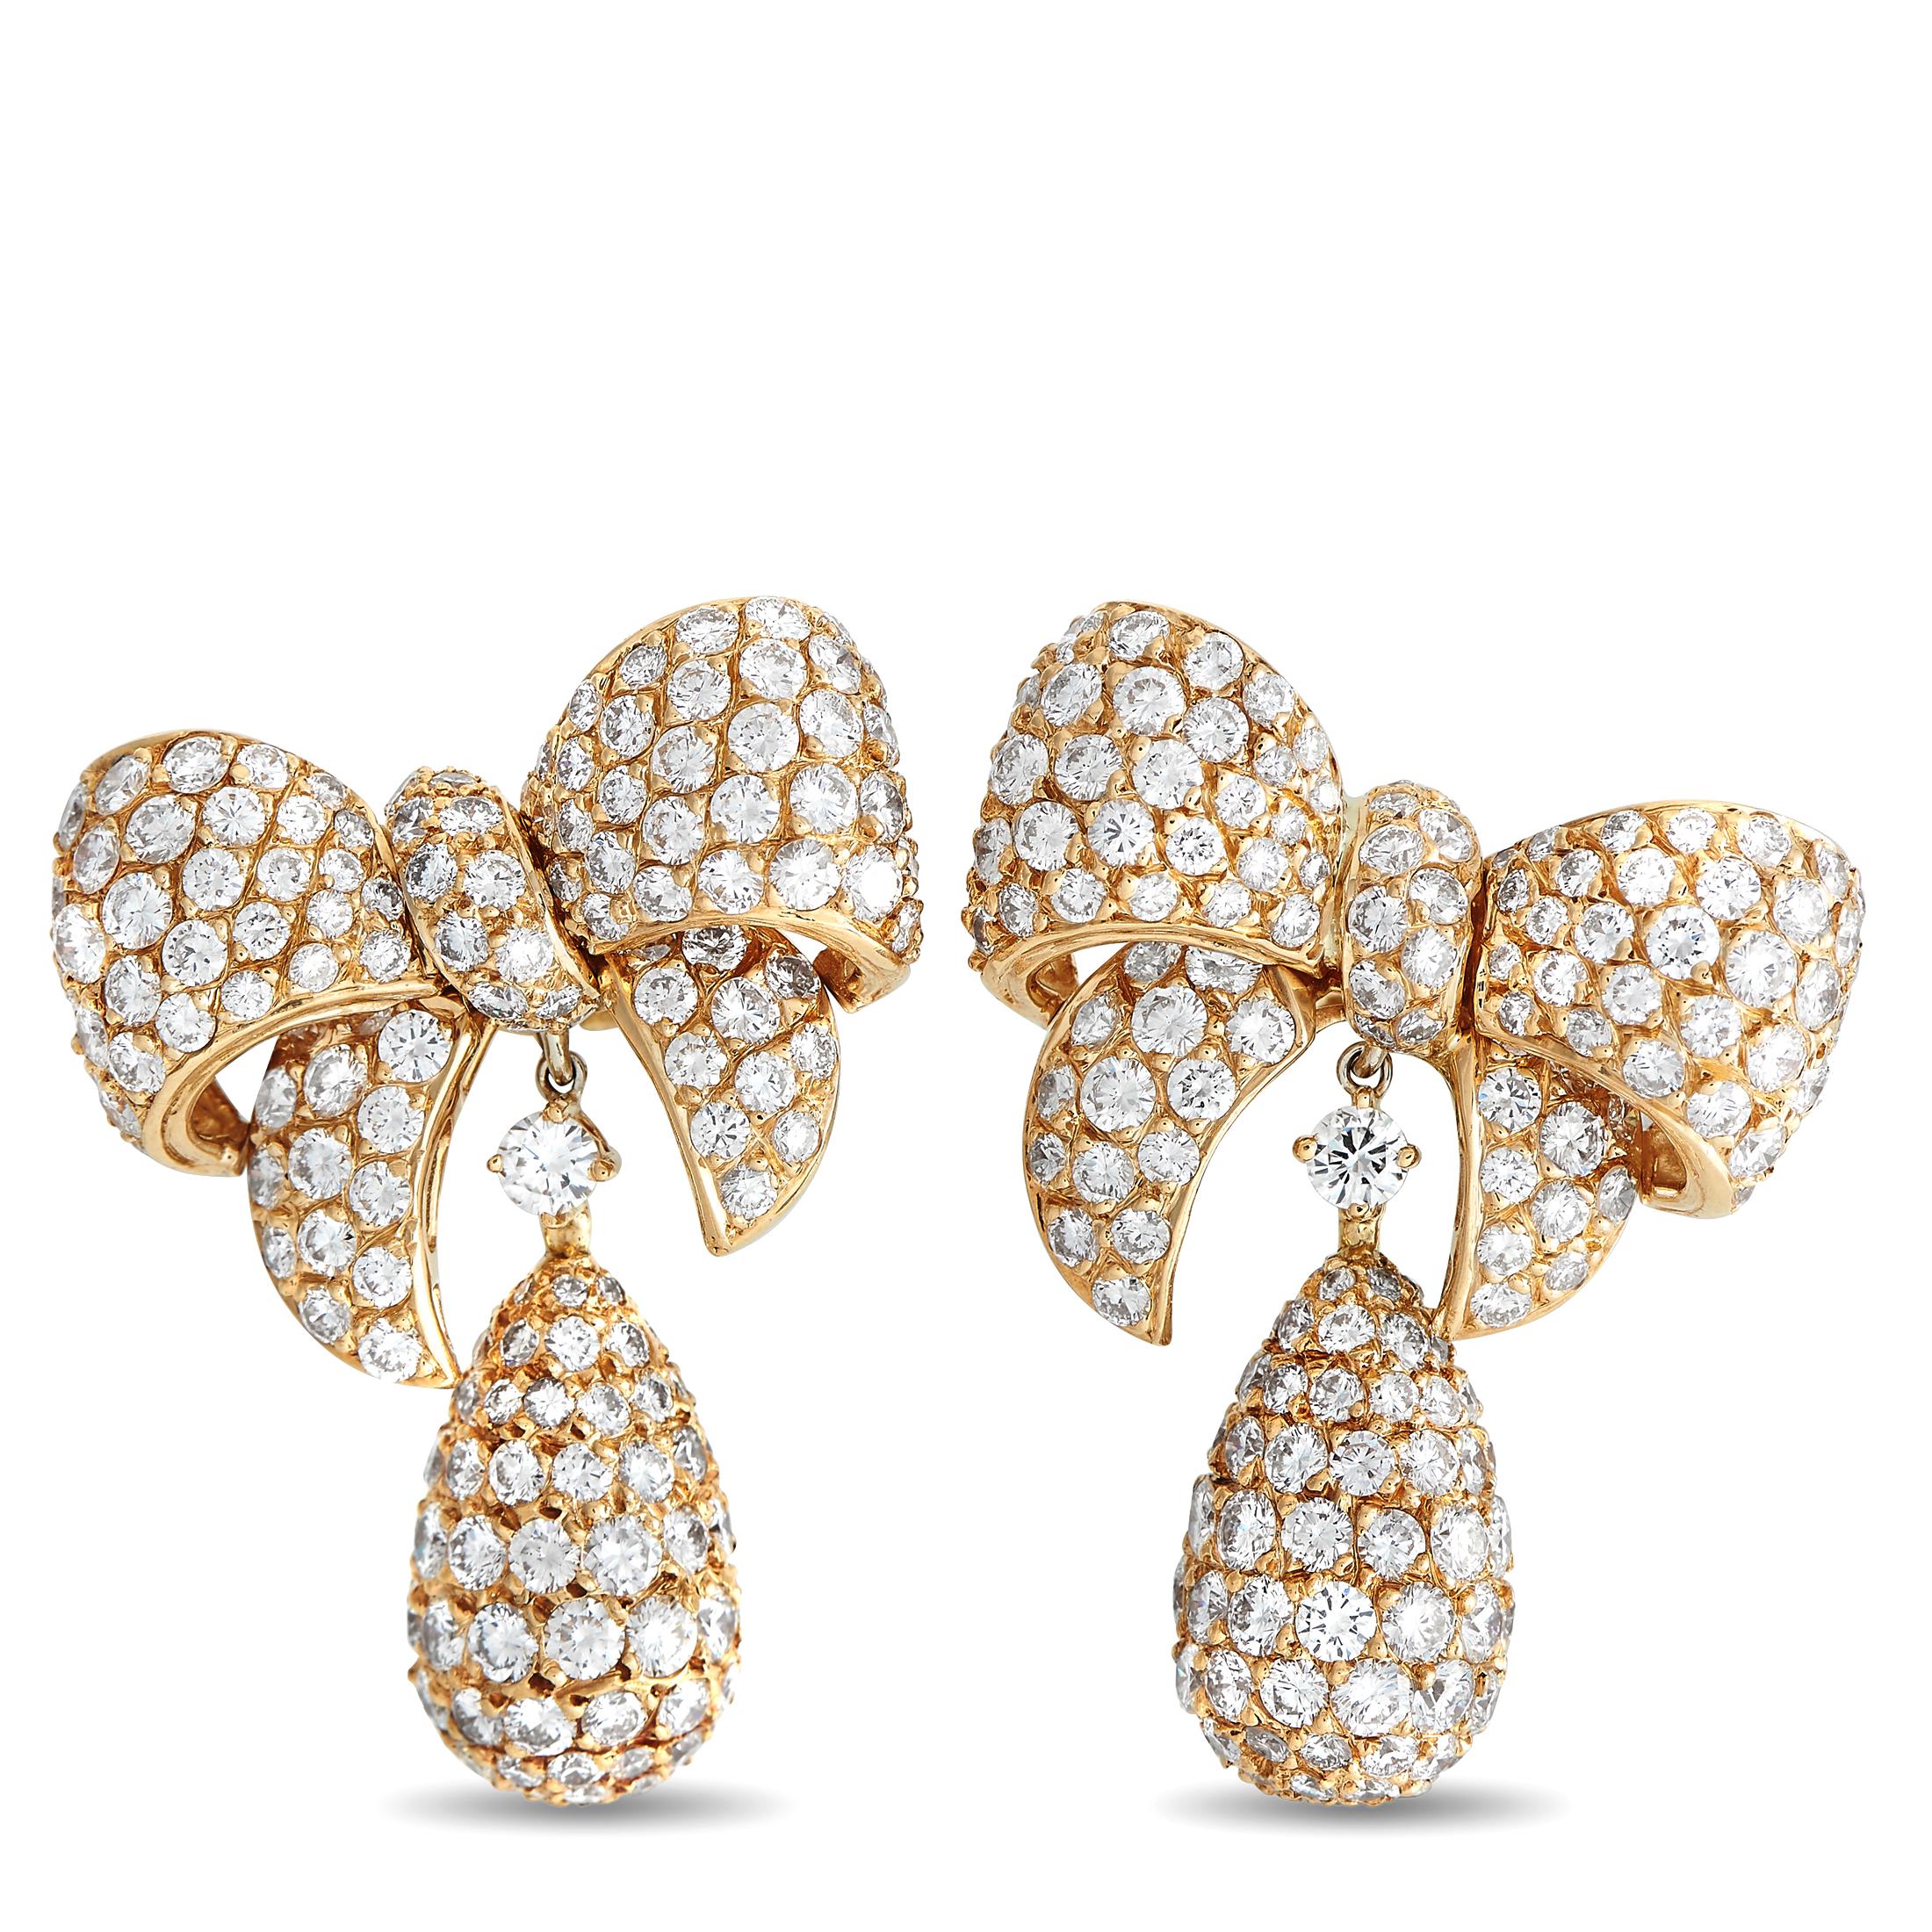 This vintage set from Graff will instantly add poise, polish, and a touch of luxury to any ensemble. The exquisite earrings feature a charming bow motif, and measure 1.25 long by 1.0 wide. This design of the earrings perfectly matches the 15